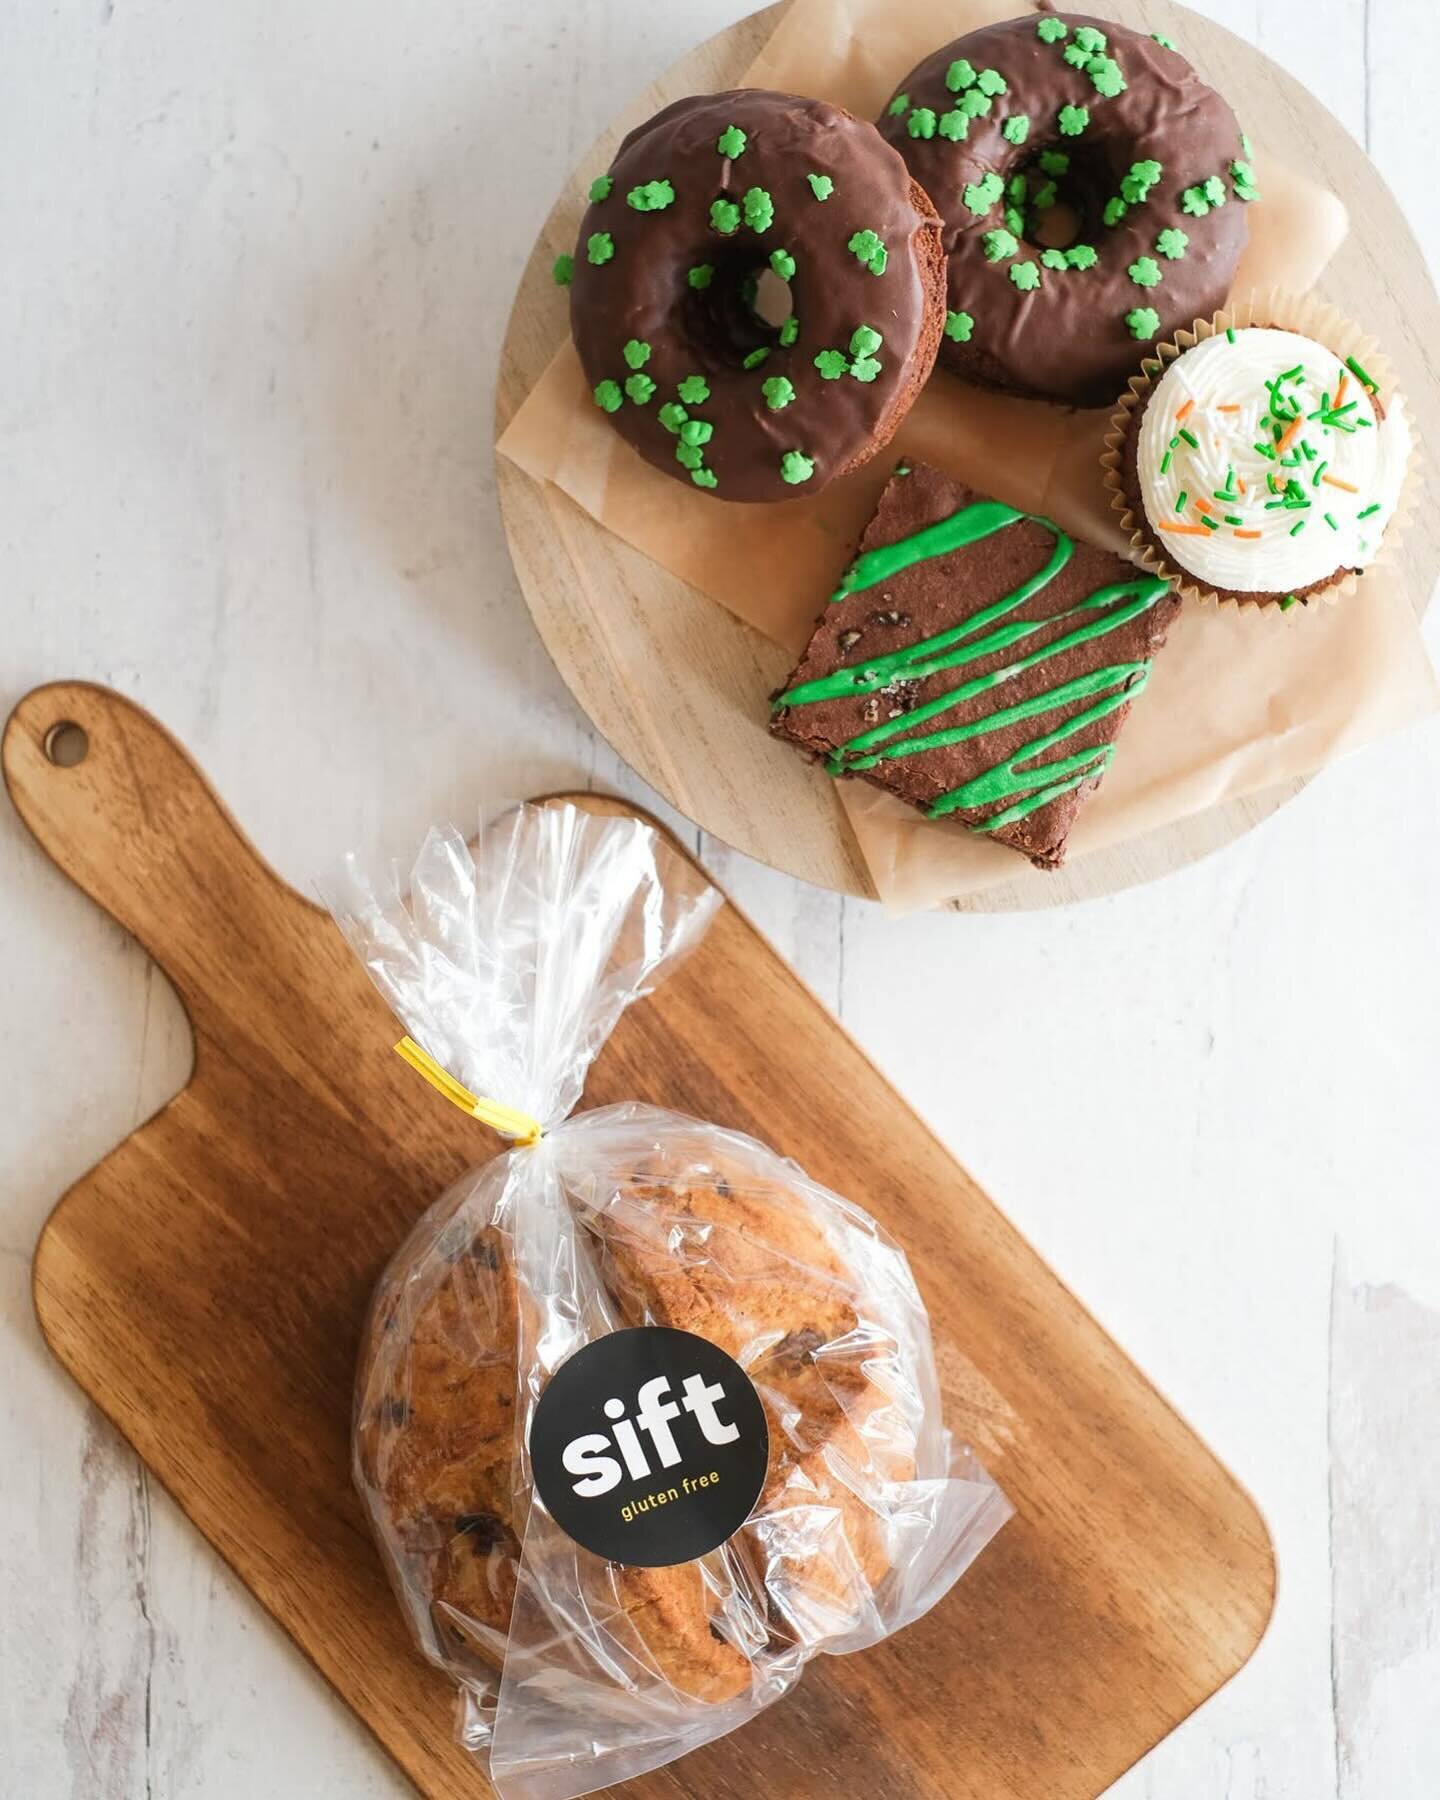 Our St. Patrick&rsquo;s Day lineup is available today through Sunday 3/17! Irish soda bread, mint brownies + Irish cream frosting. 🍀

Link in bio to place a same-day order, or just stop in!

#stpatricksday #🍀 #spring #glutenfree #minneapolis #twinc